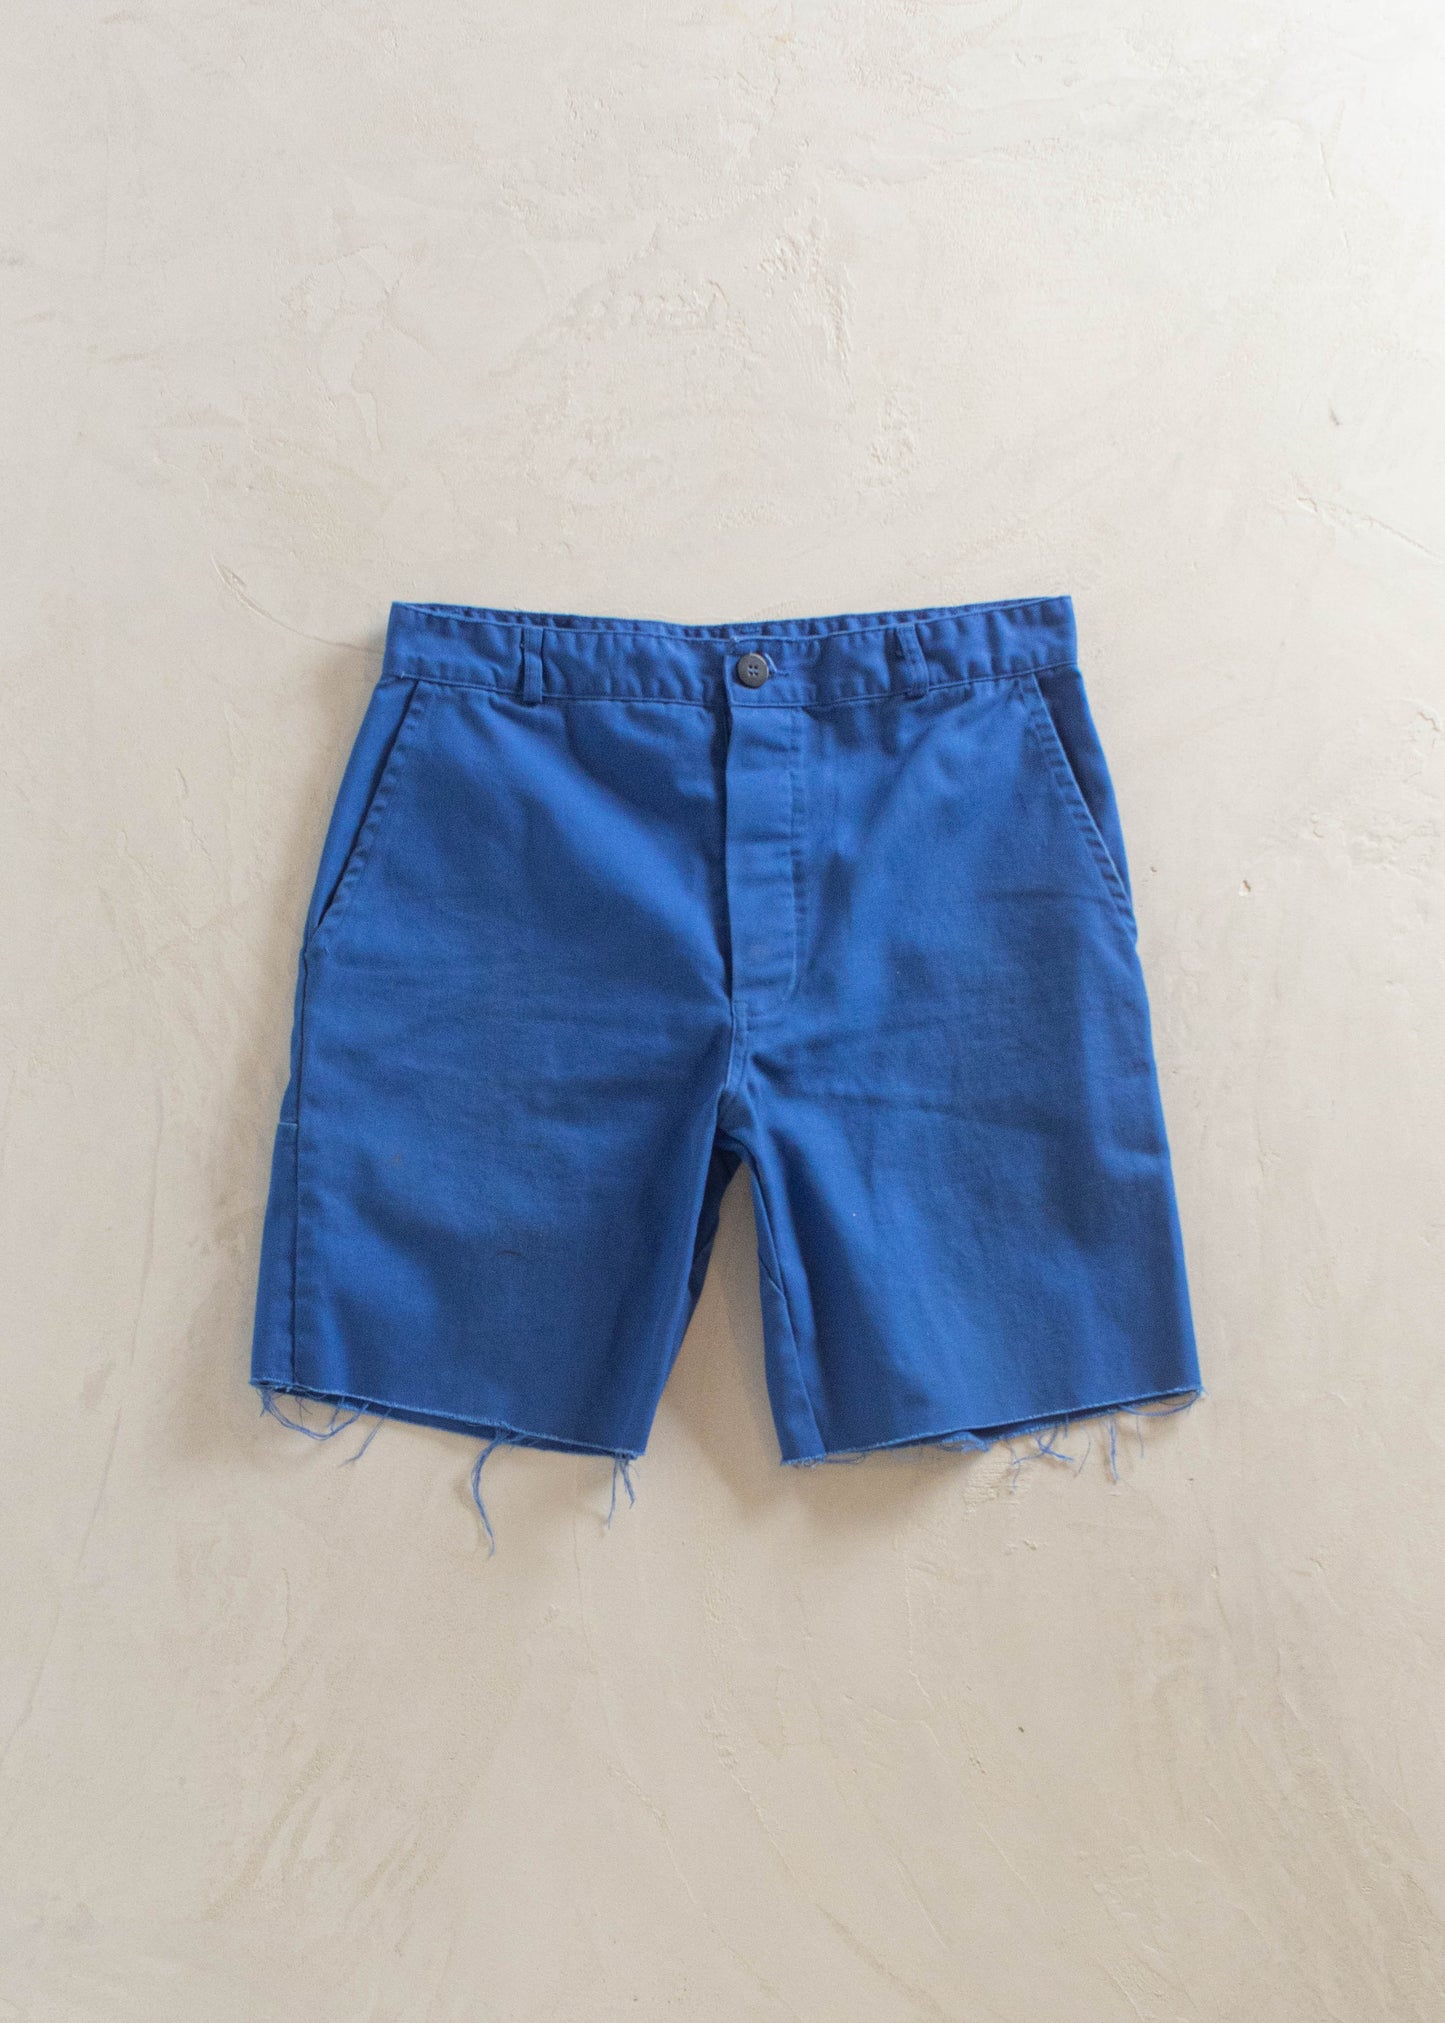 1980s Adolphe Lafont French Workwear Shorts Size Women's 31 Men's 33